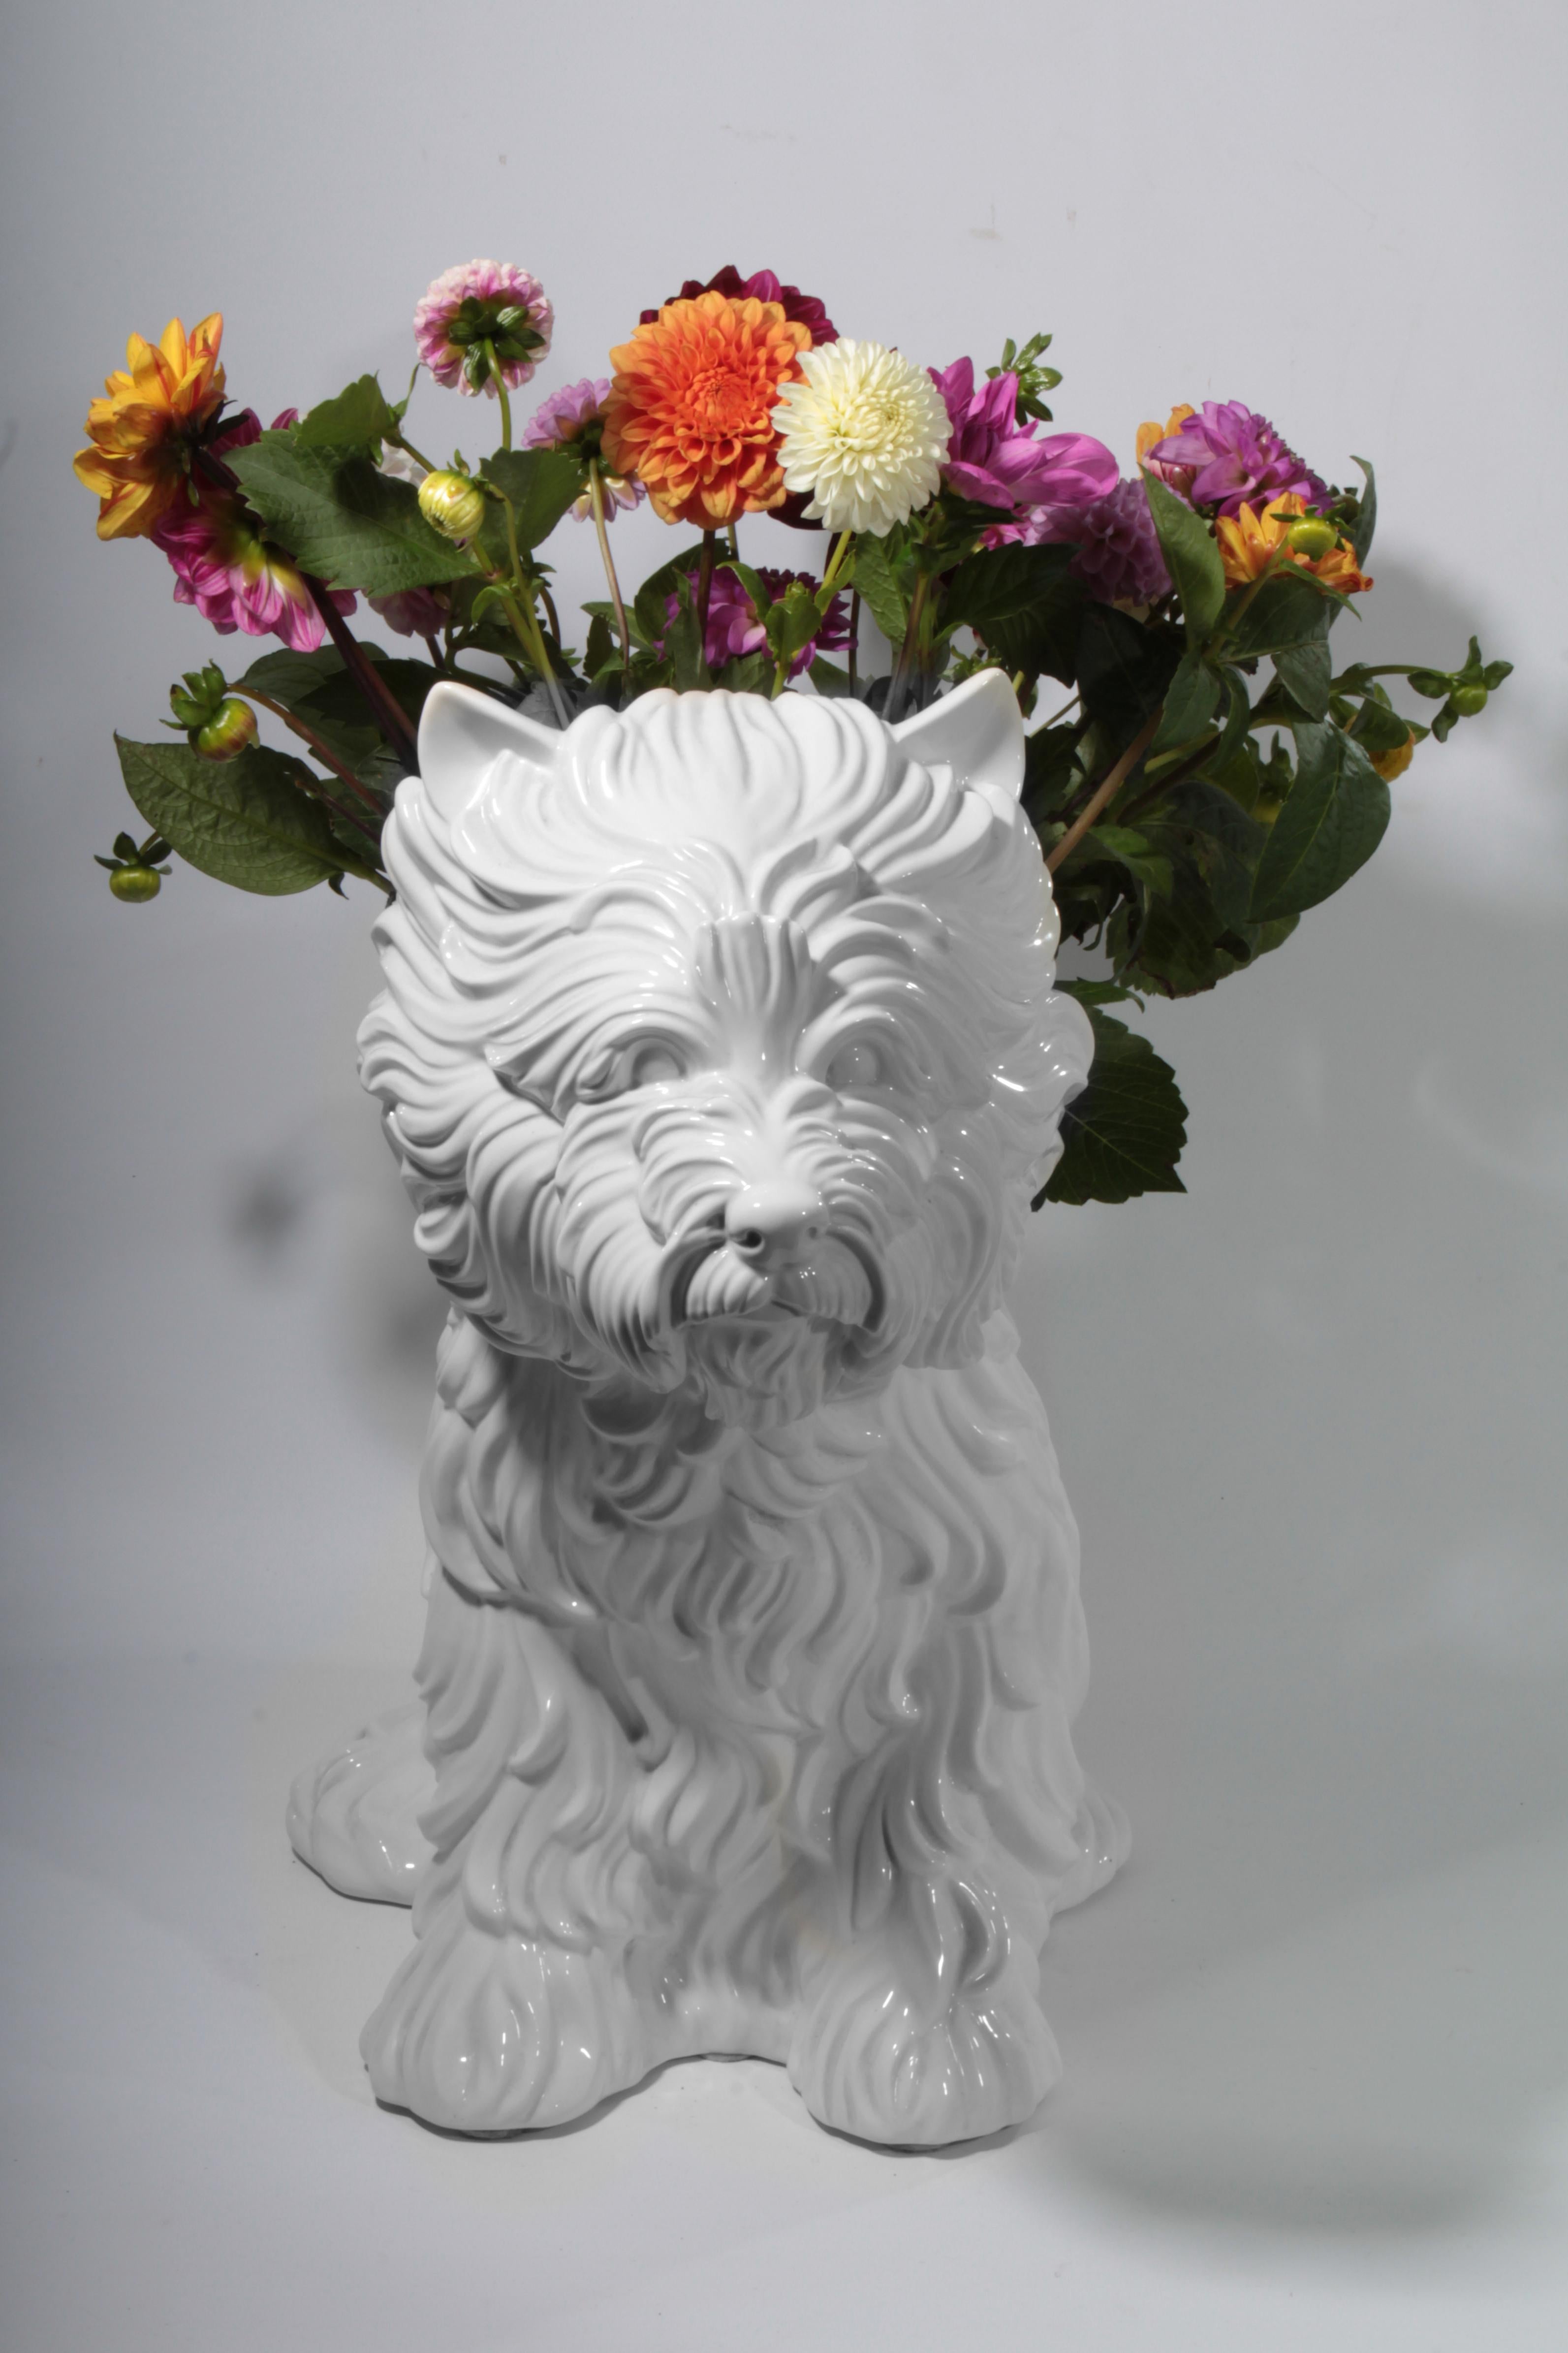 Jeff Koons puppy vase made from white glazed porcelain. The design took cues from Koons’s mongo-sized puppy sculpture (1992), which was filled with over seventeen thousand flowers. “The vase is a symbol of love, warmth, and happiness,” says Koons.